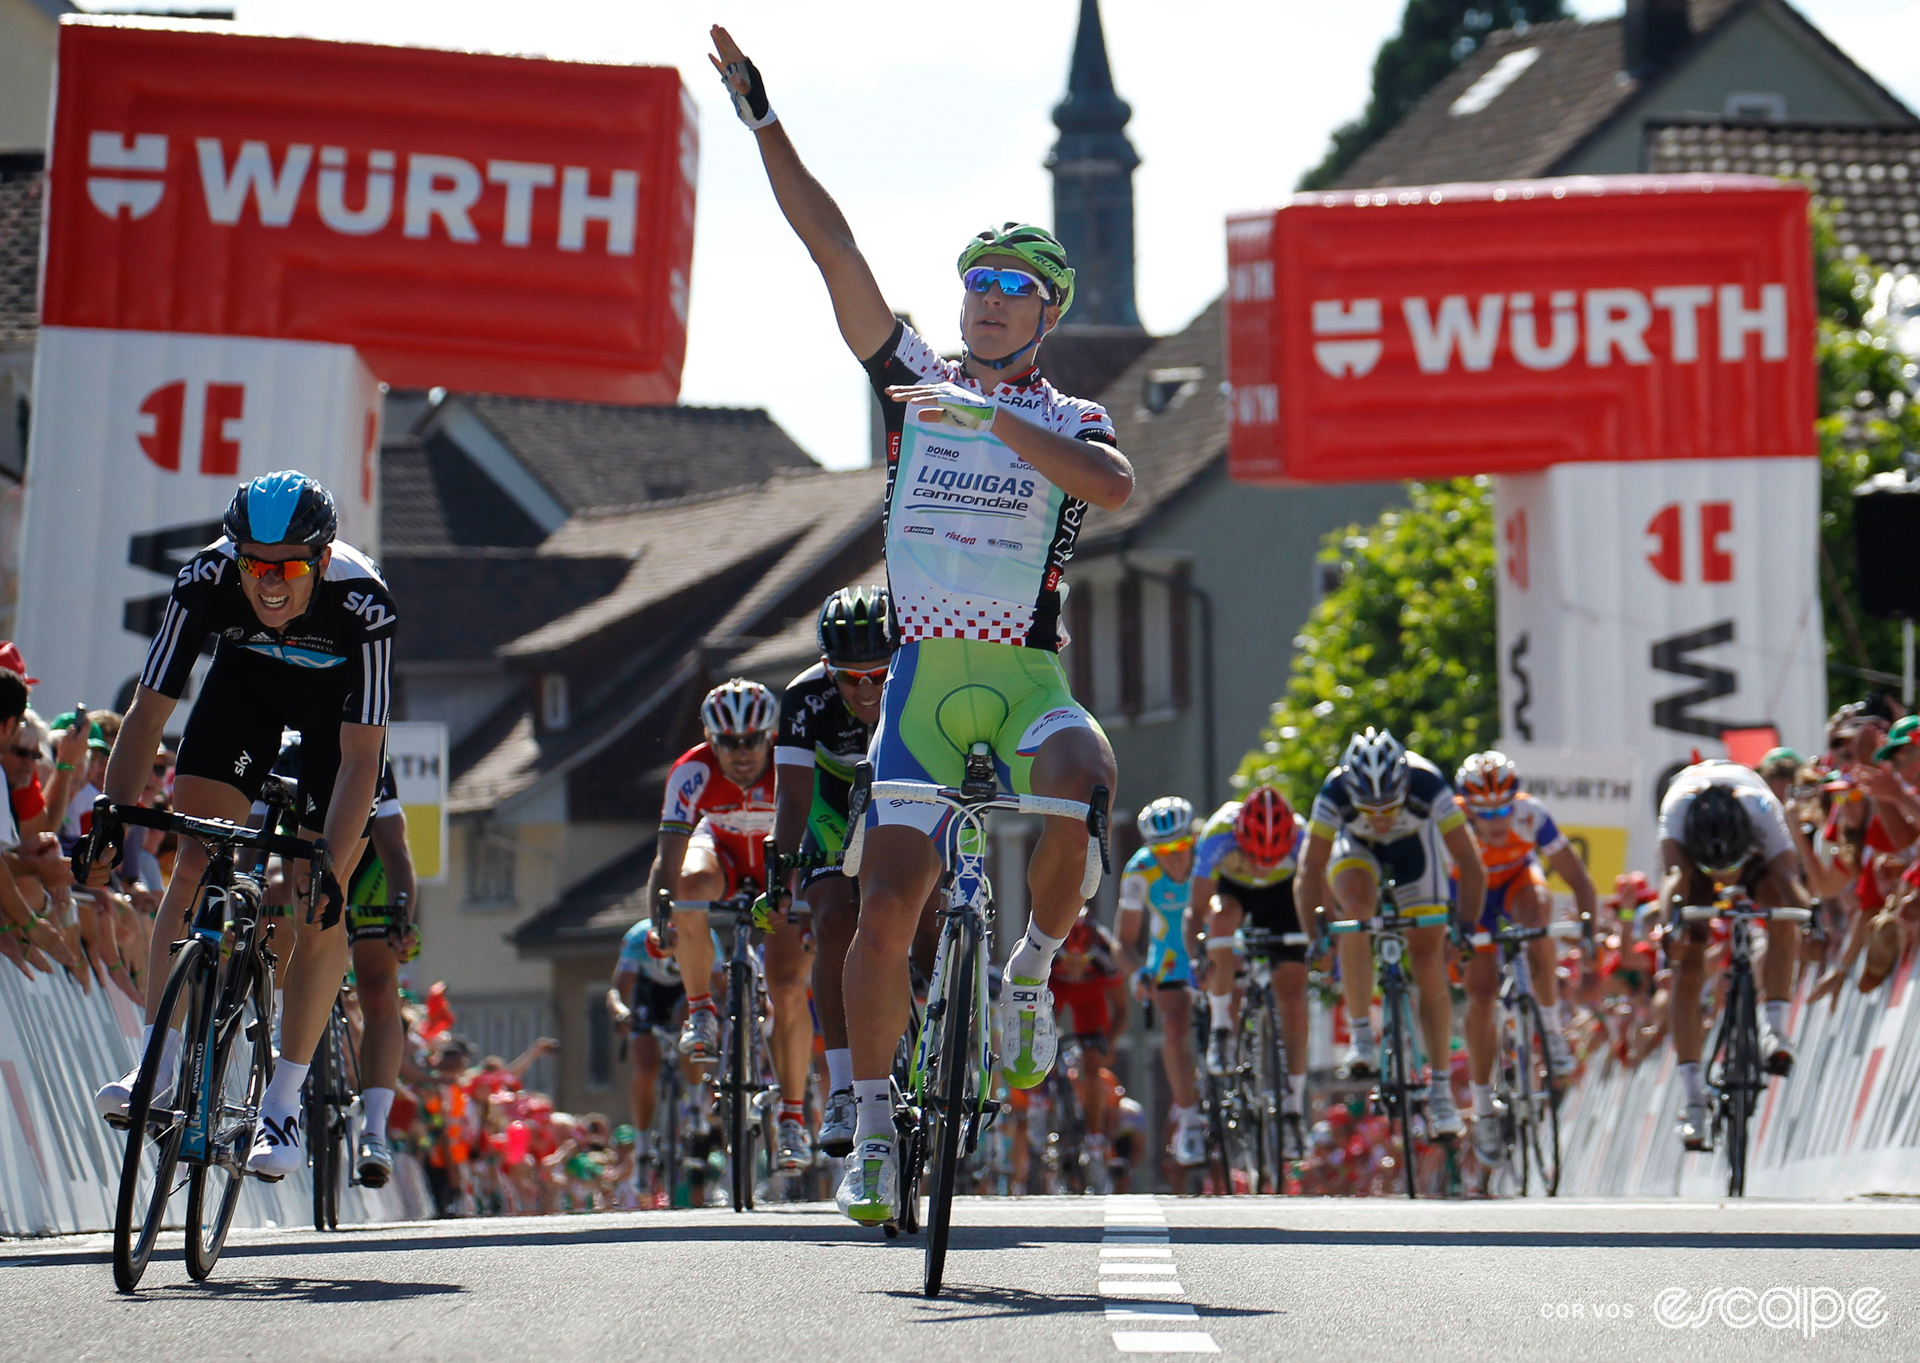 Peter Sagan celebrates winning a stage at the 2012 Tour de Suisse with one arm outstretched above his head.